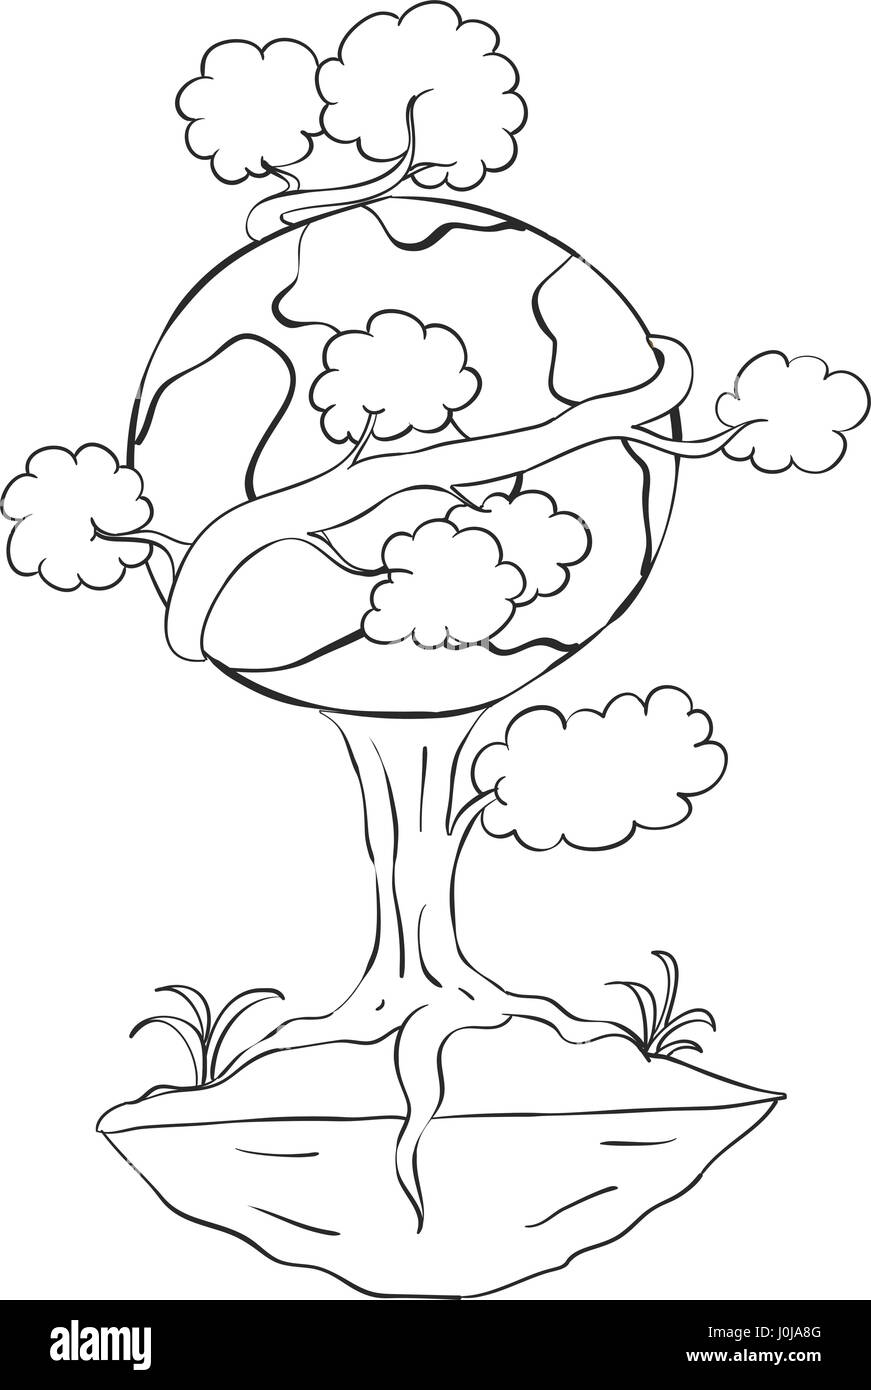 15 – Earth Day Coloring Page – LauraJaenArt-saigonsouth.com.vn